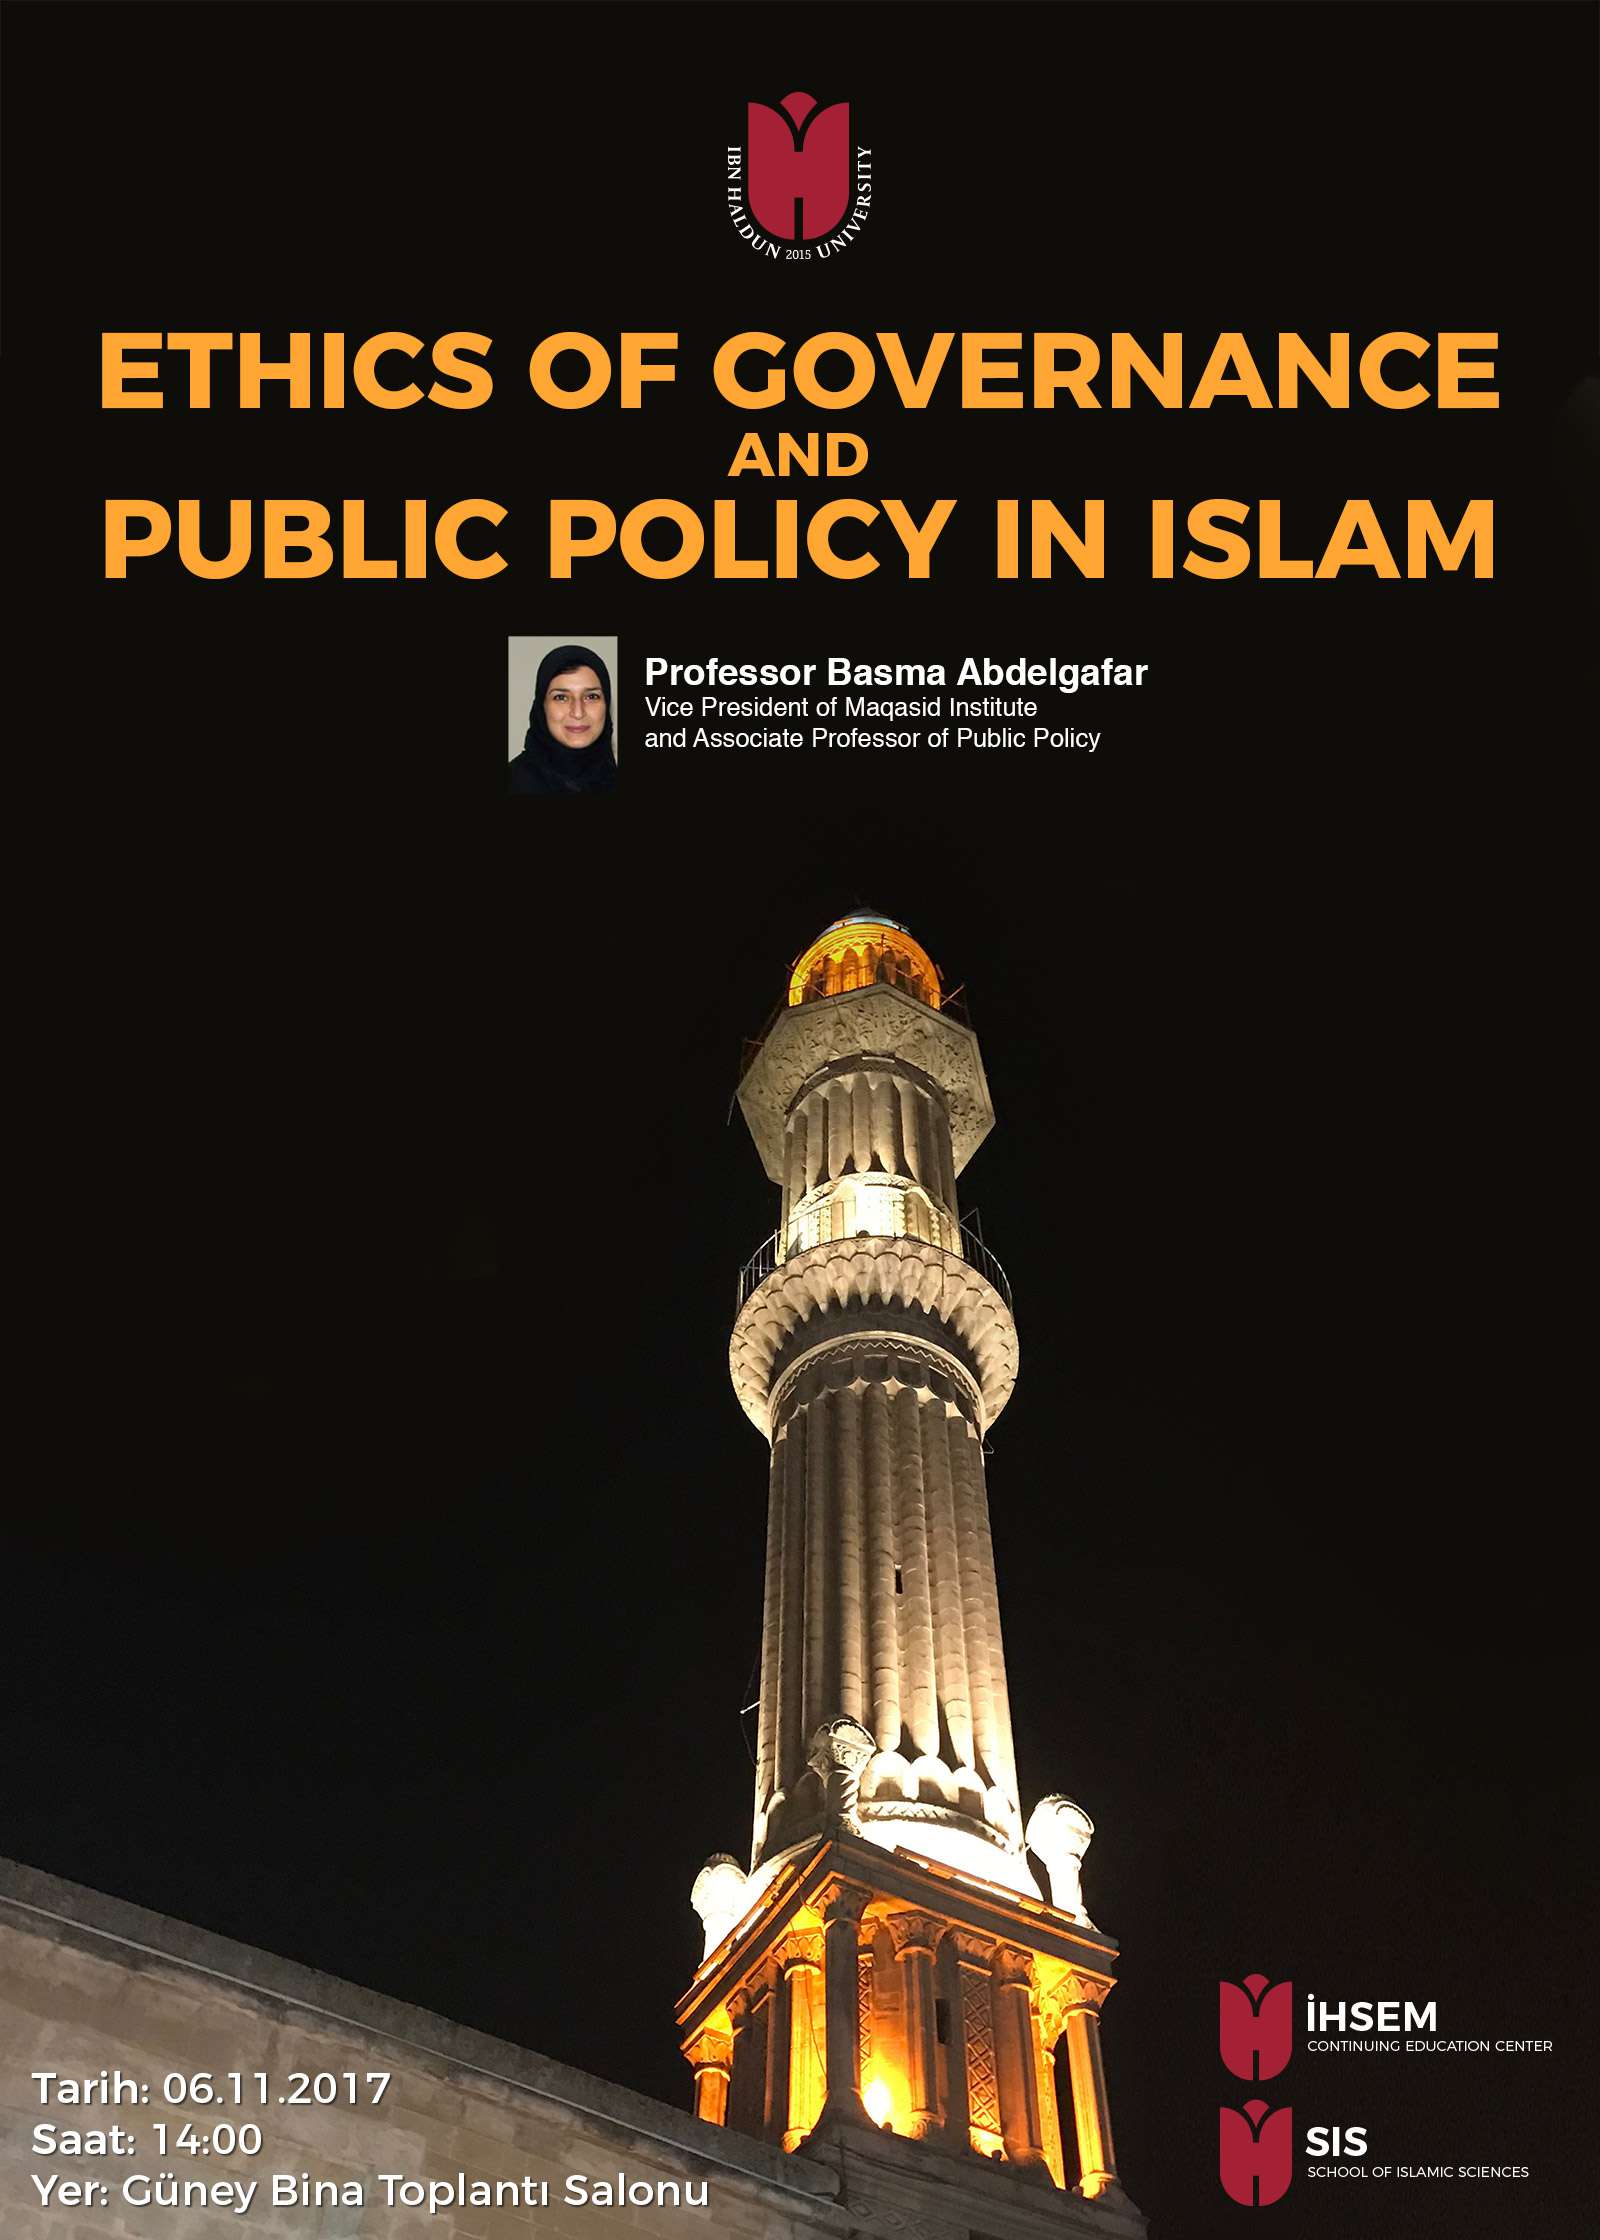 Ethics of Governance and Public Policy in Islam